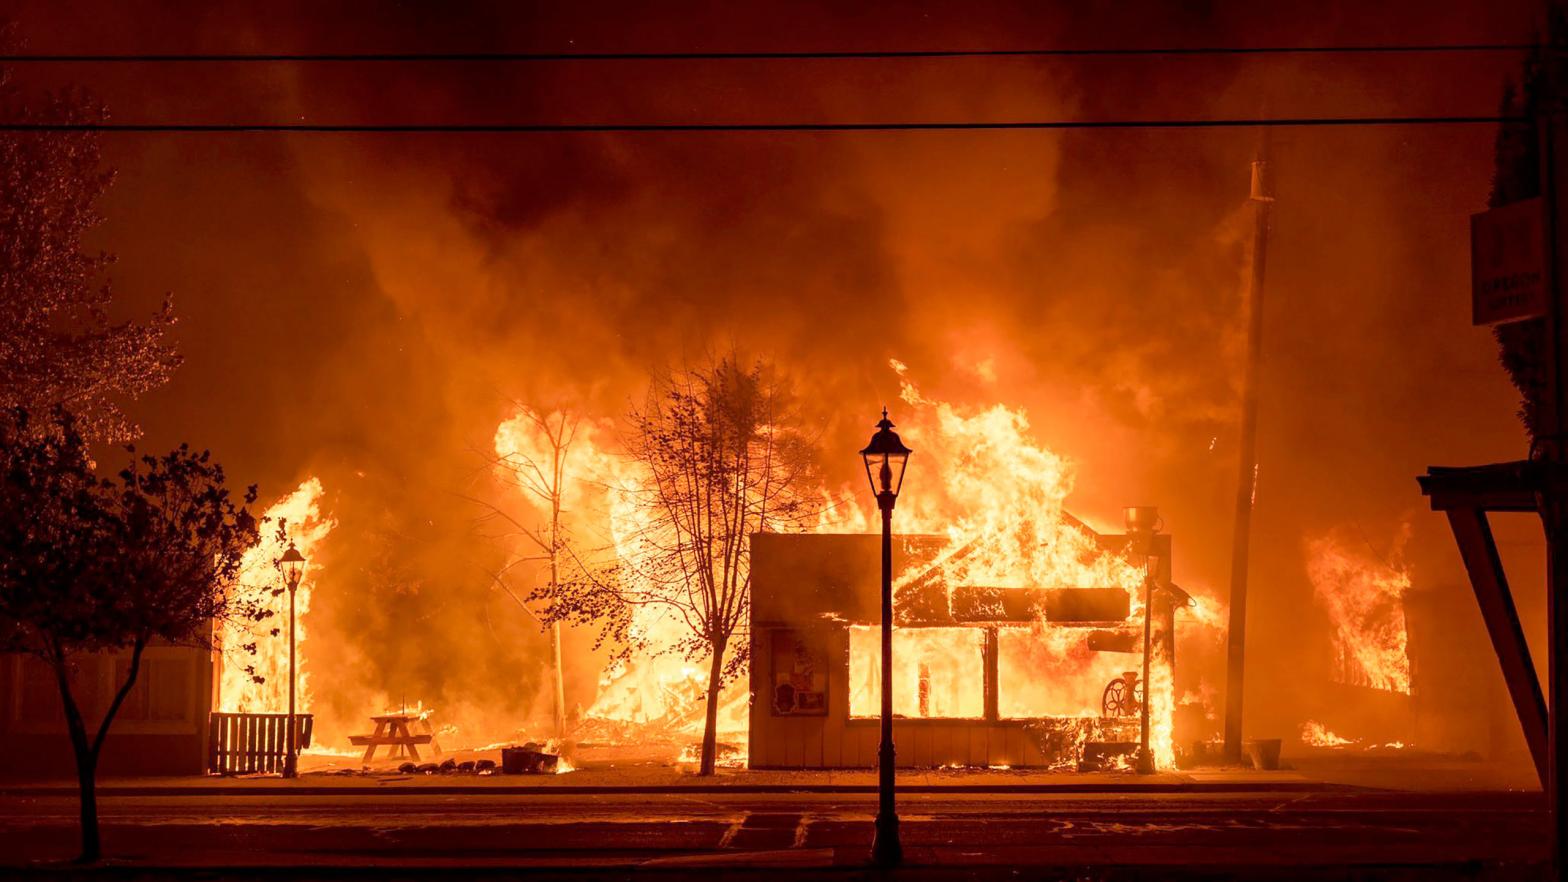 Buildings are engulfed in flames as a wildfire ravages the central Oregon town of Talent near Medford. (Photo: Kevin Jantzer, AP)